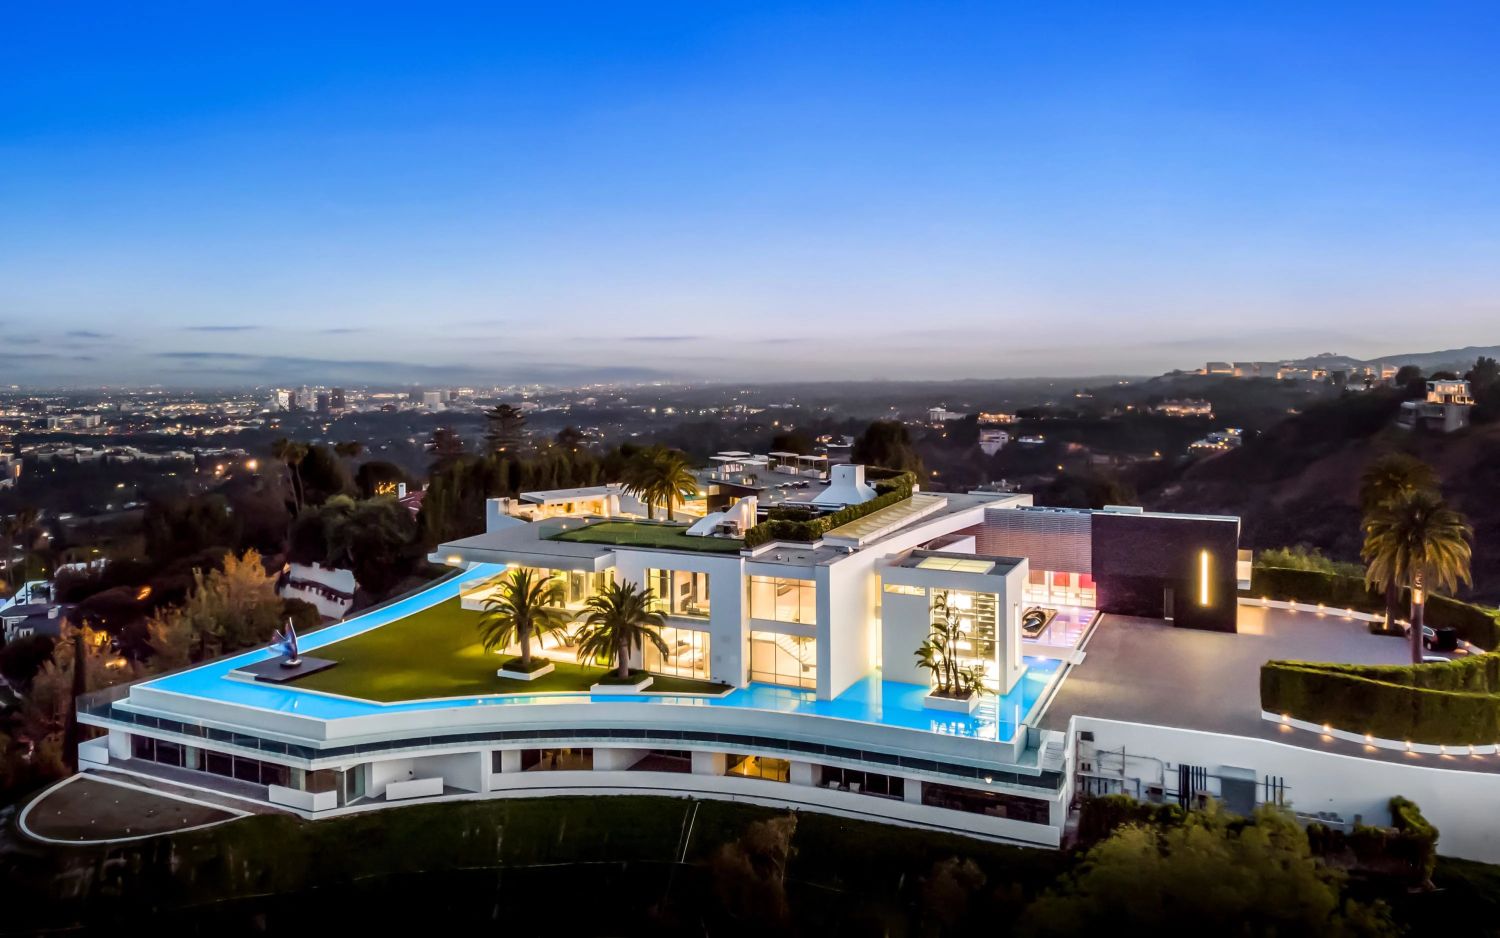 The One, America’s largest and most expensive private residence